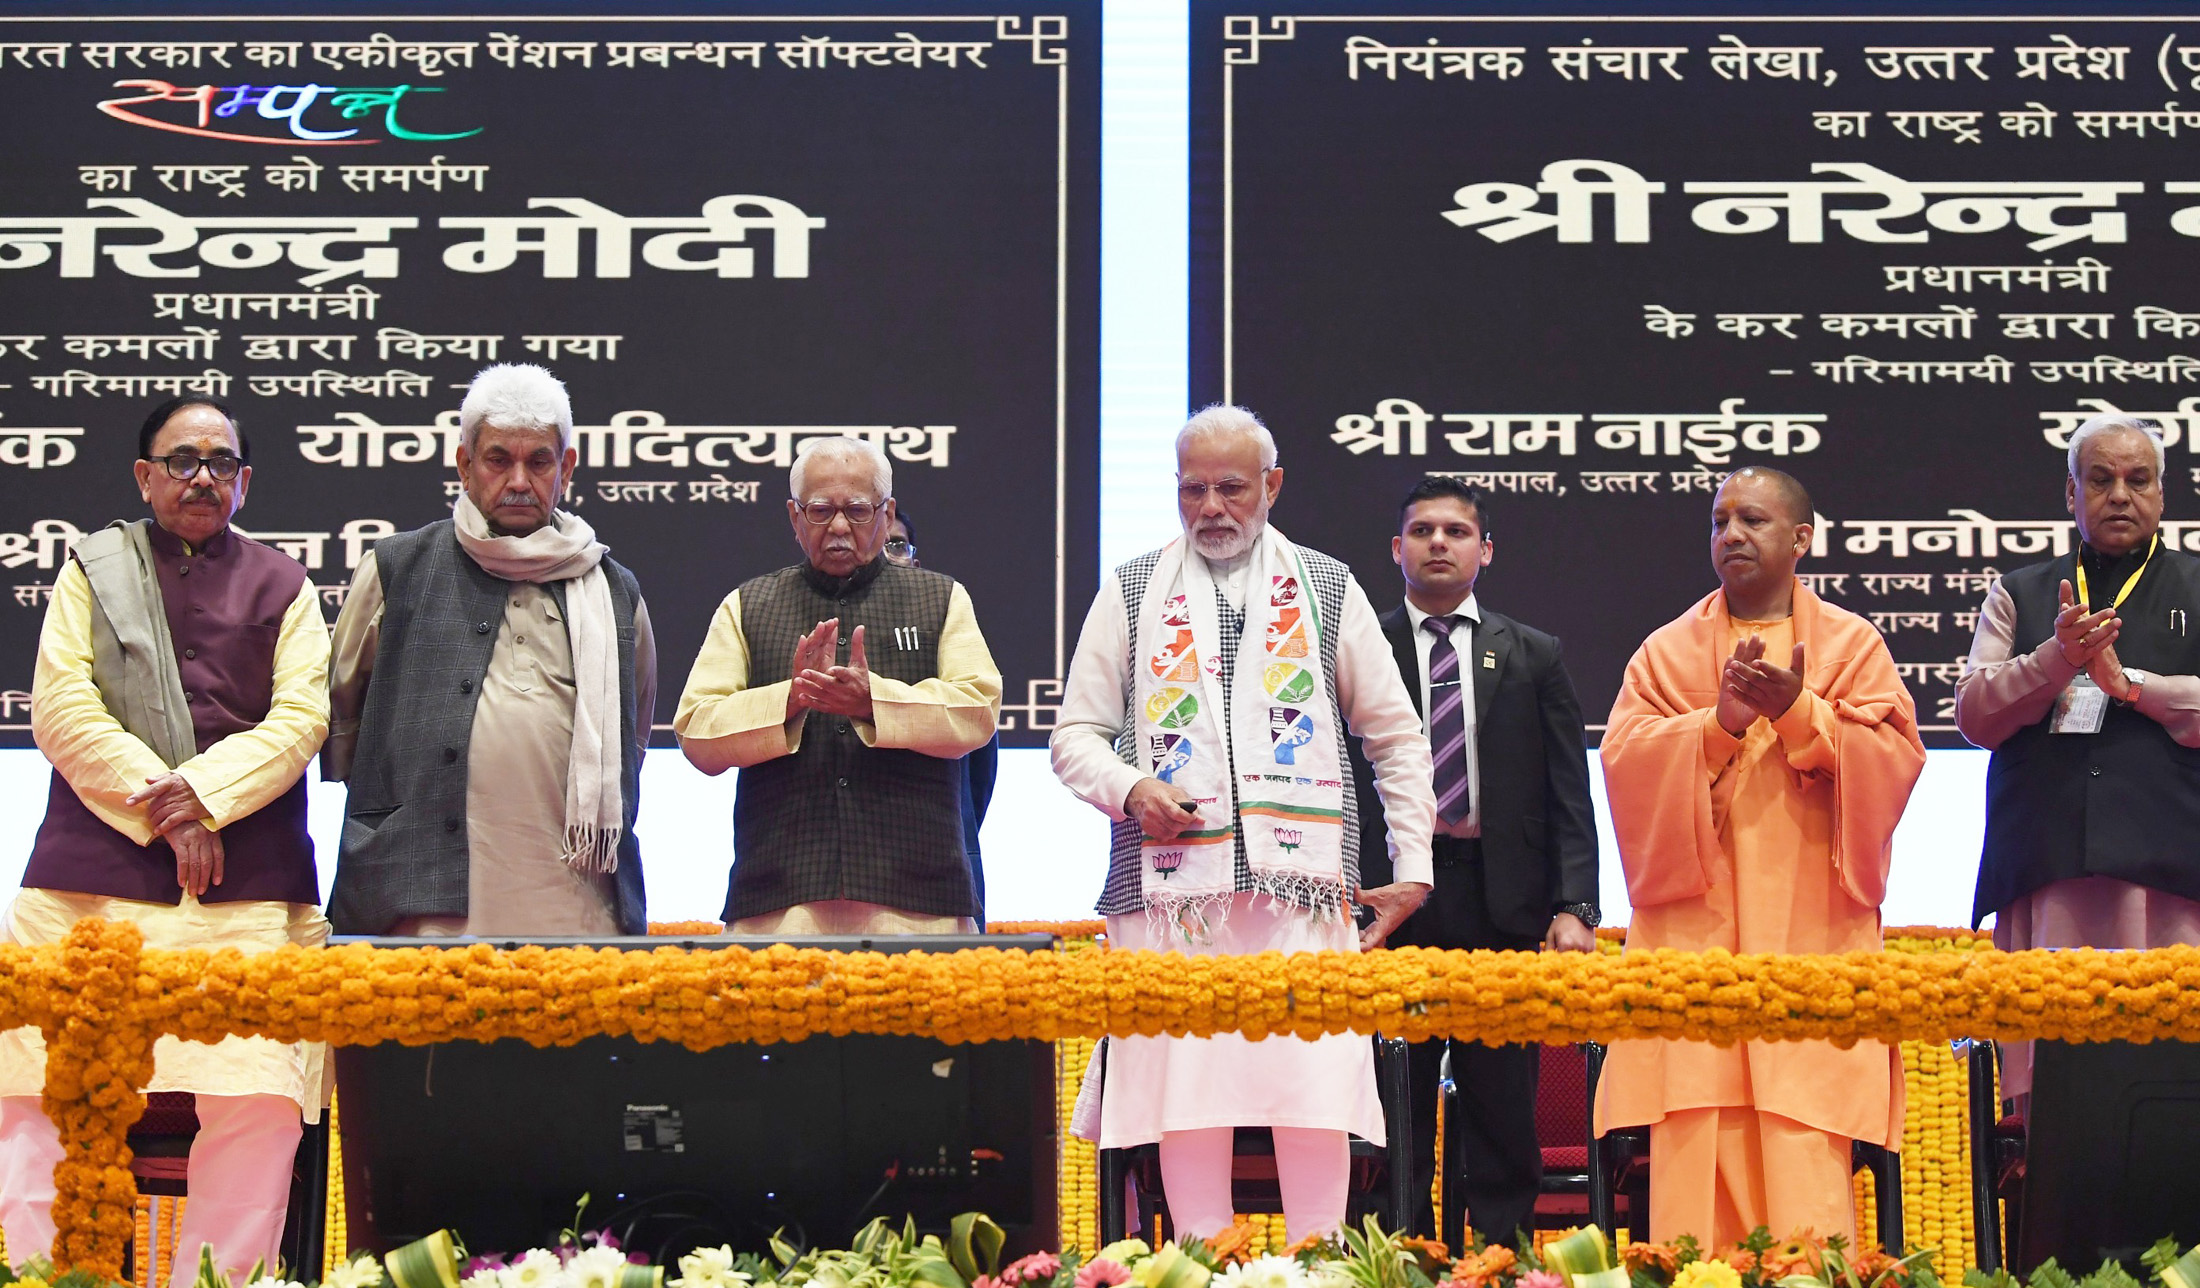 Narendra Modi lays foundation stone of medical college in Ghazipur